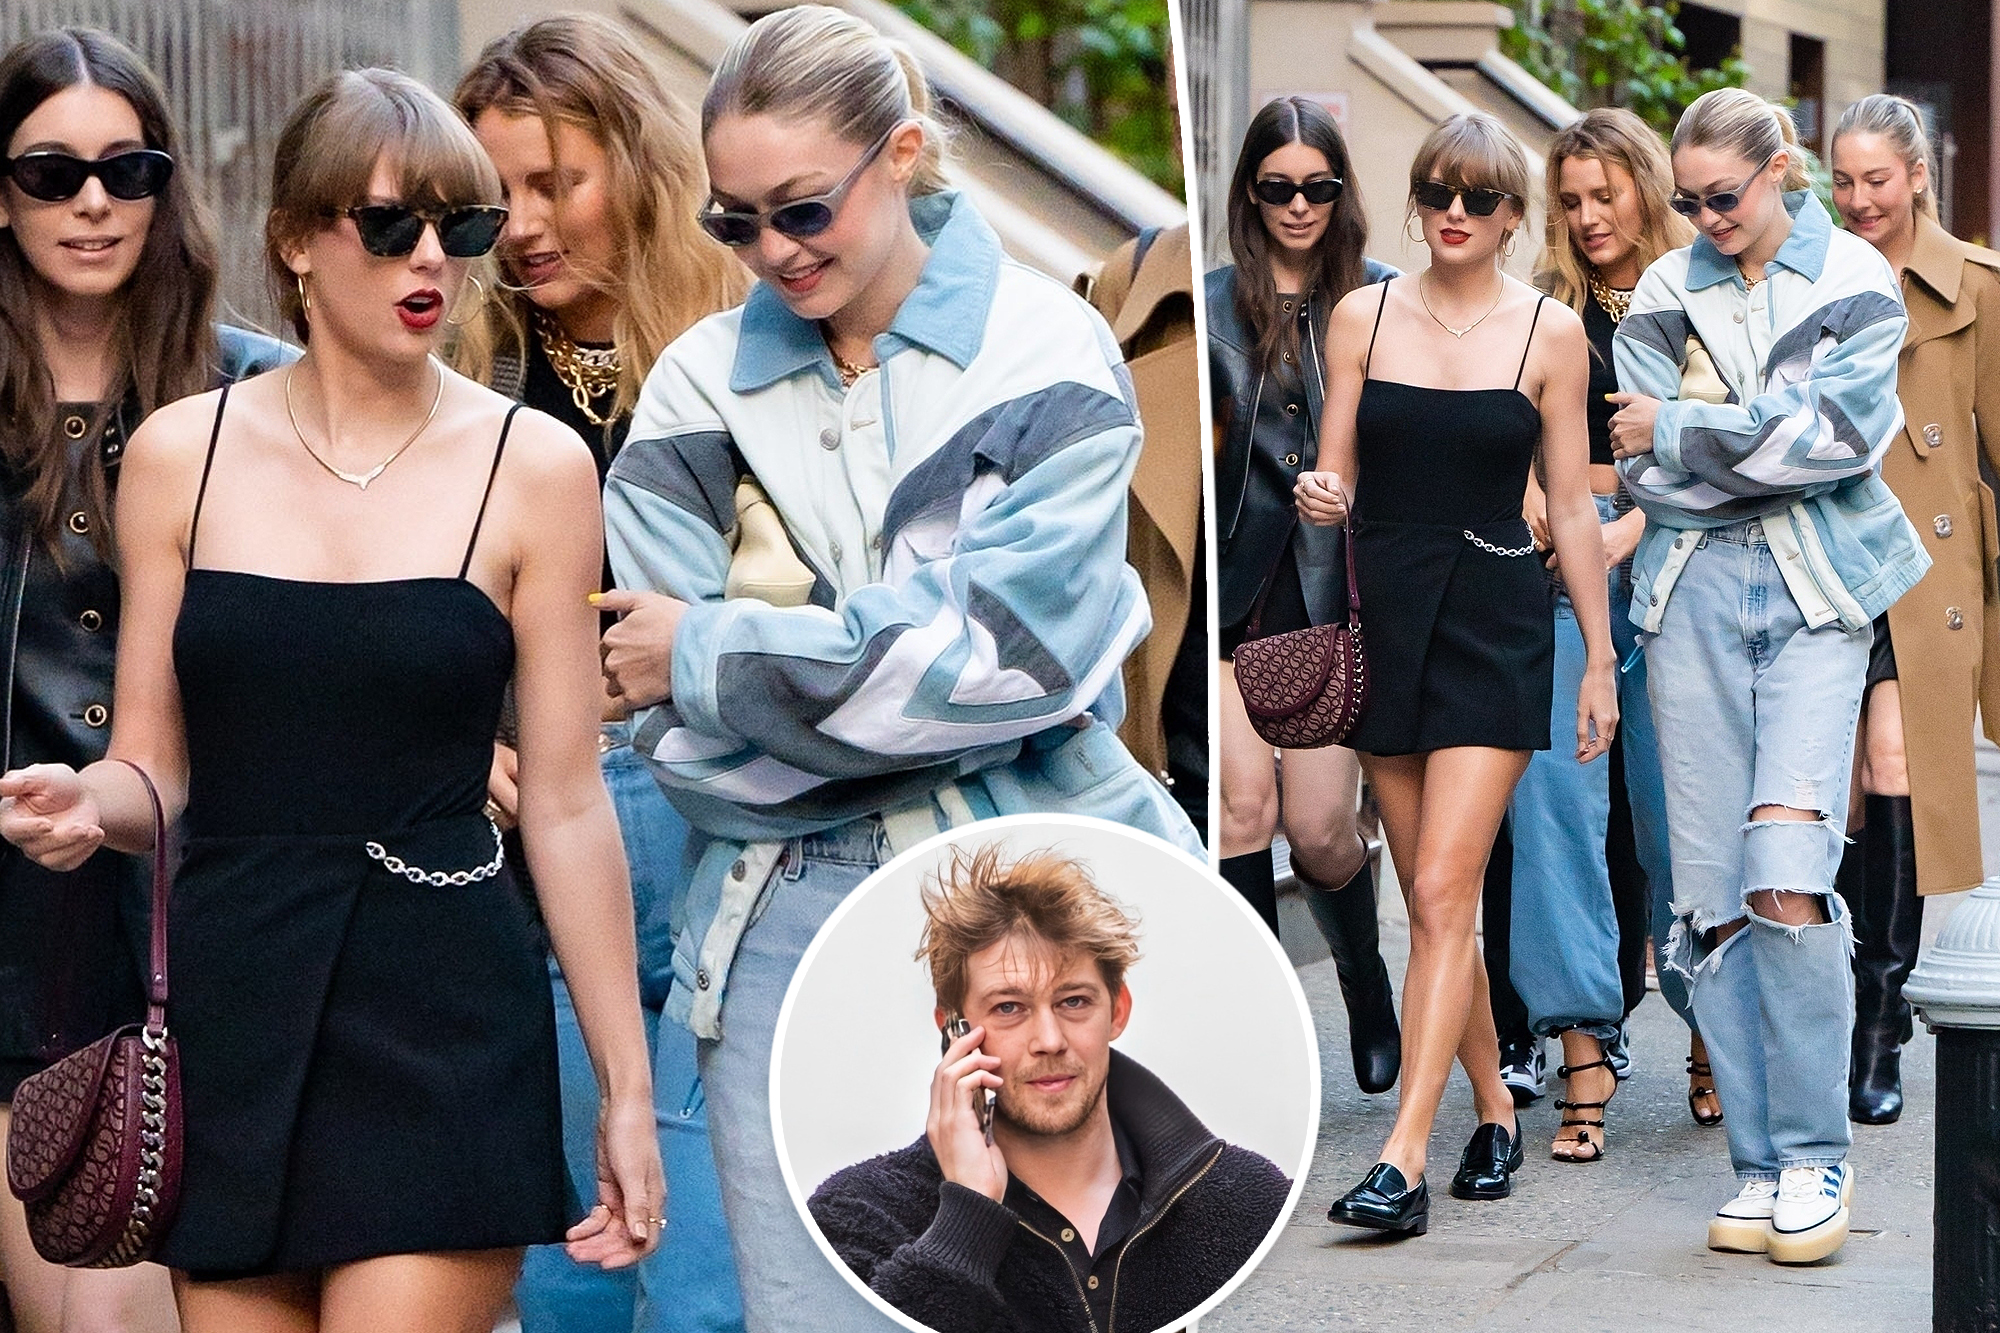 How Long Has Taylor Swift Been Friends With Blake Lively?